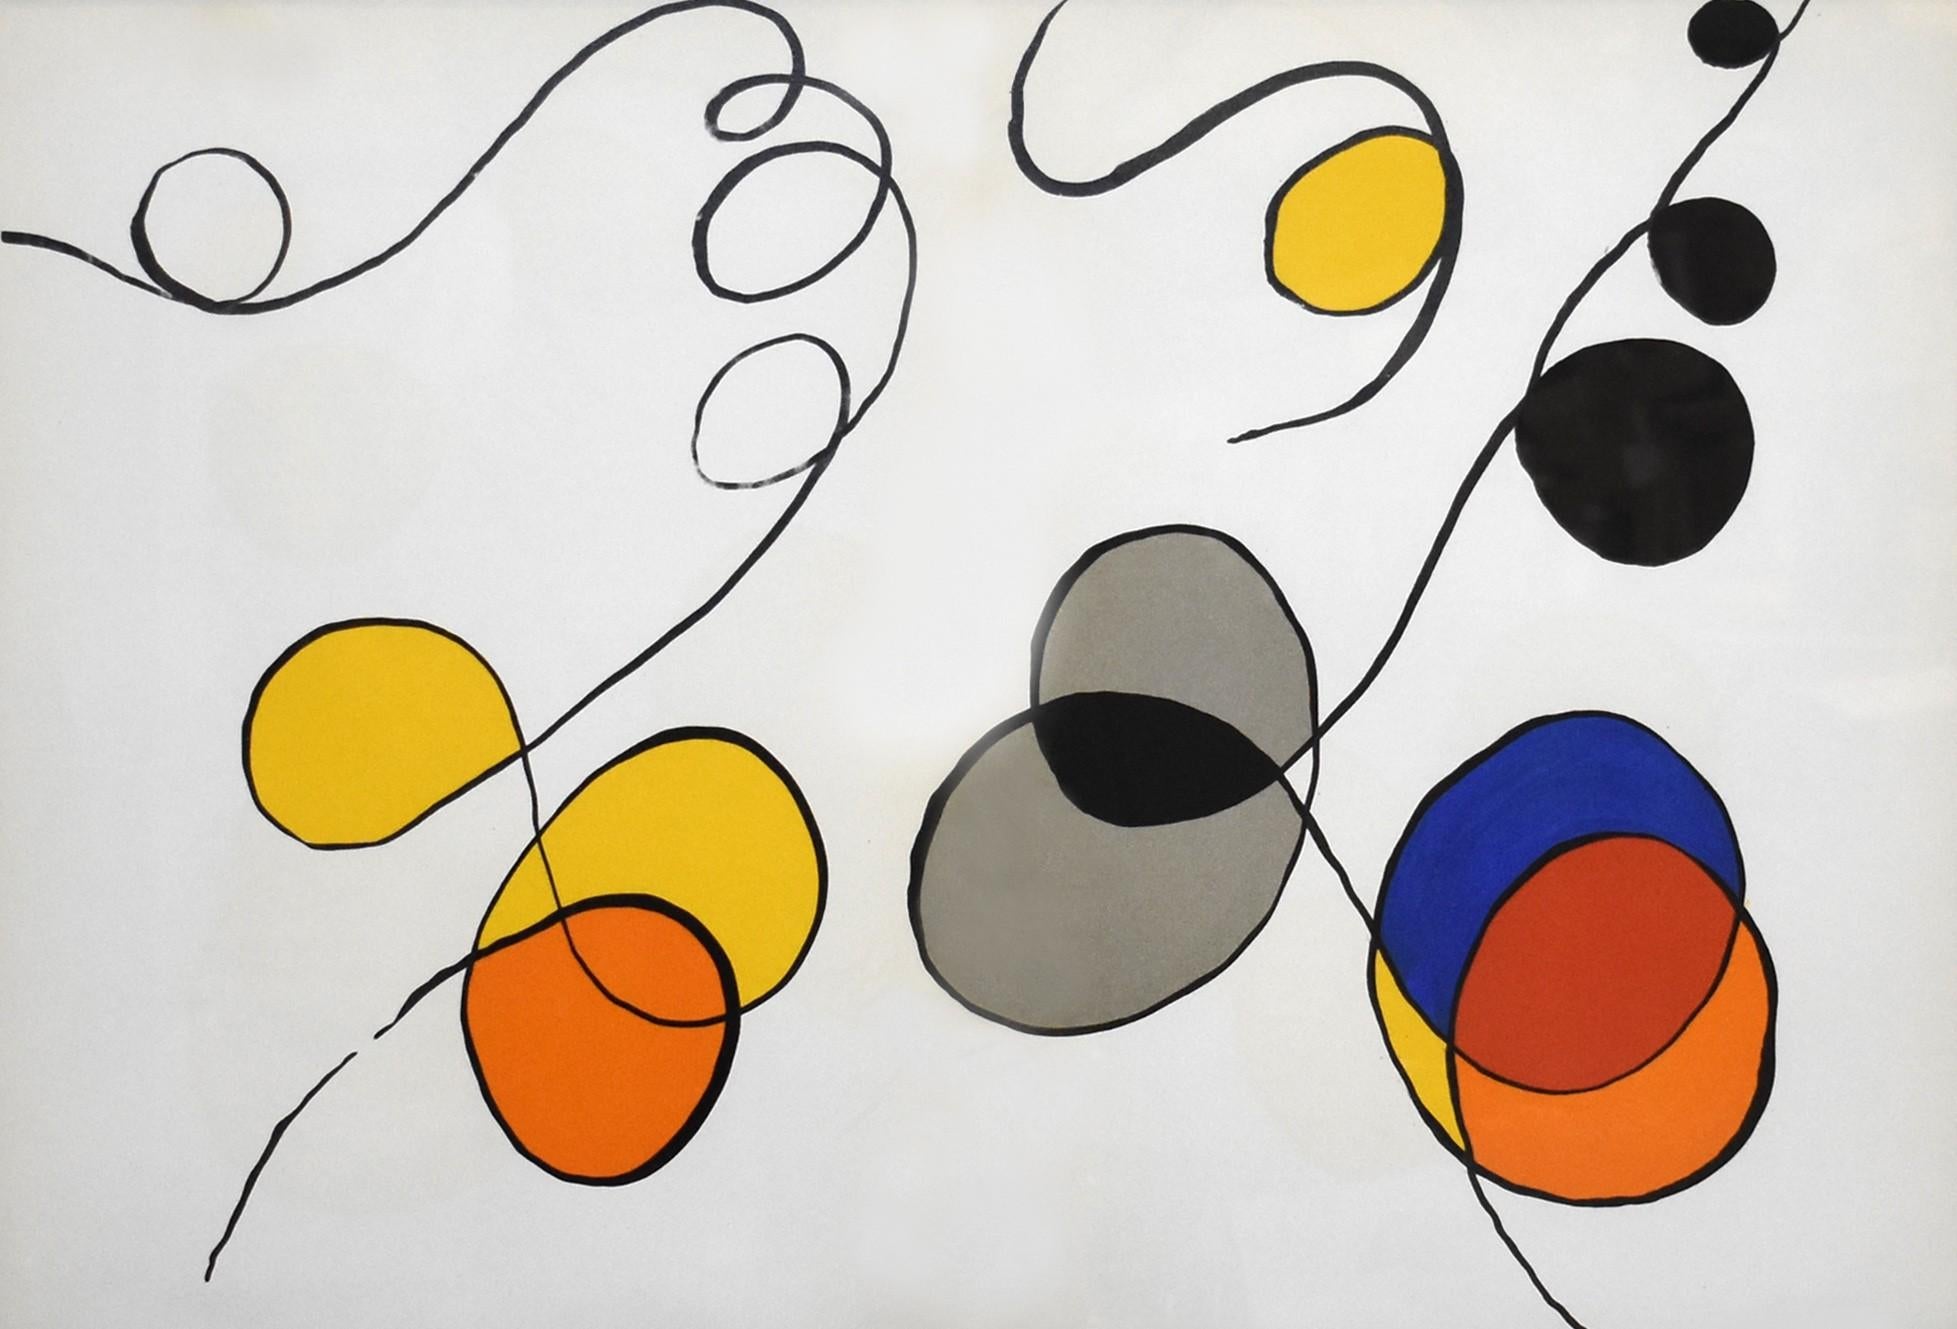 Untitled, from Derriere le Miroir #173 - Abstract Print by Alexander Calder